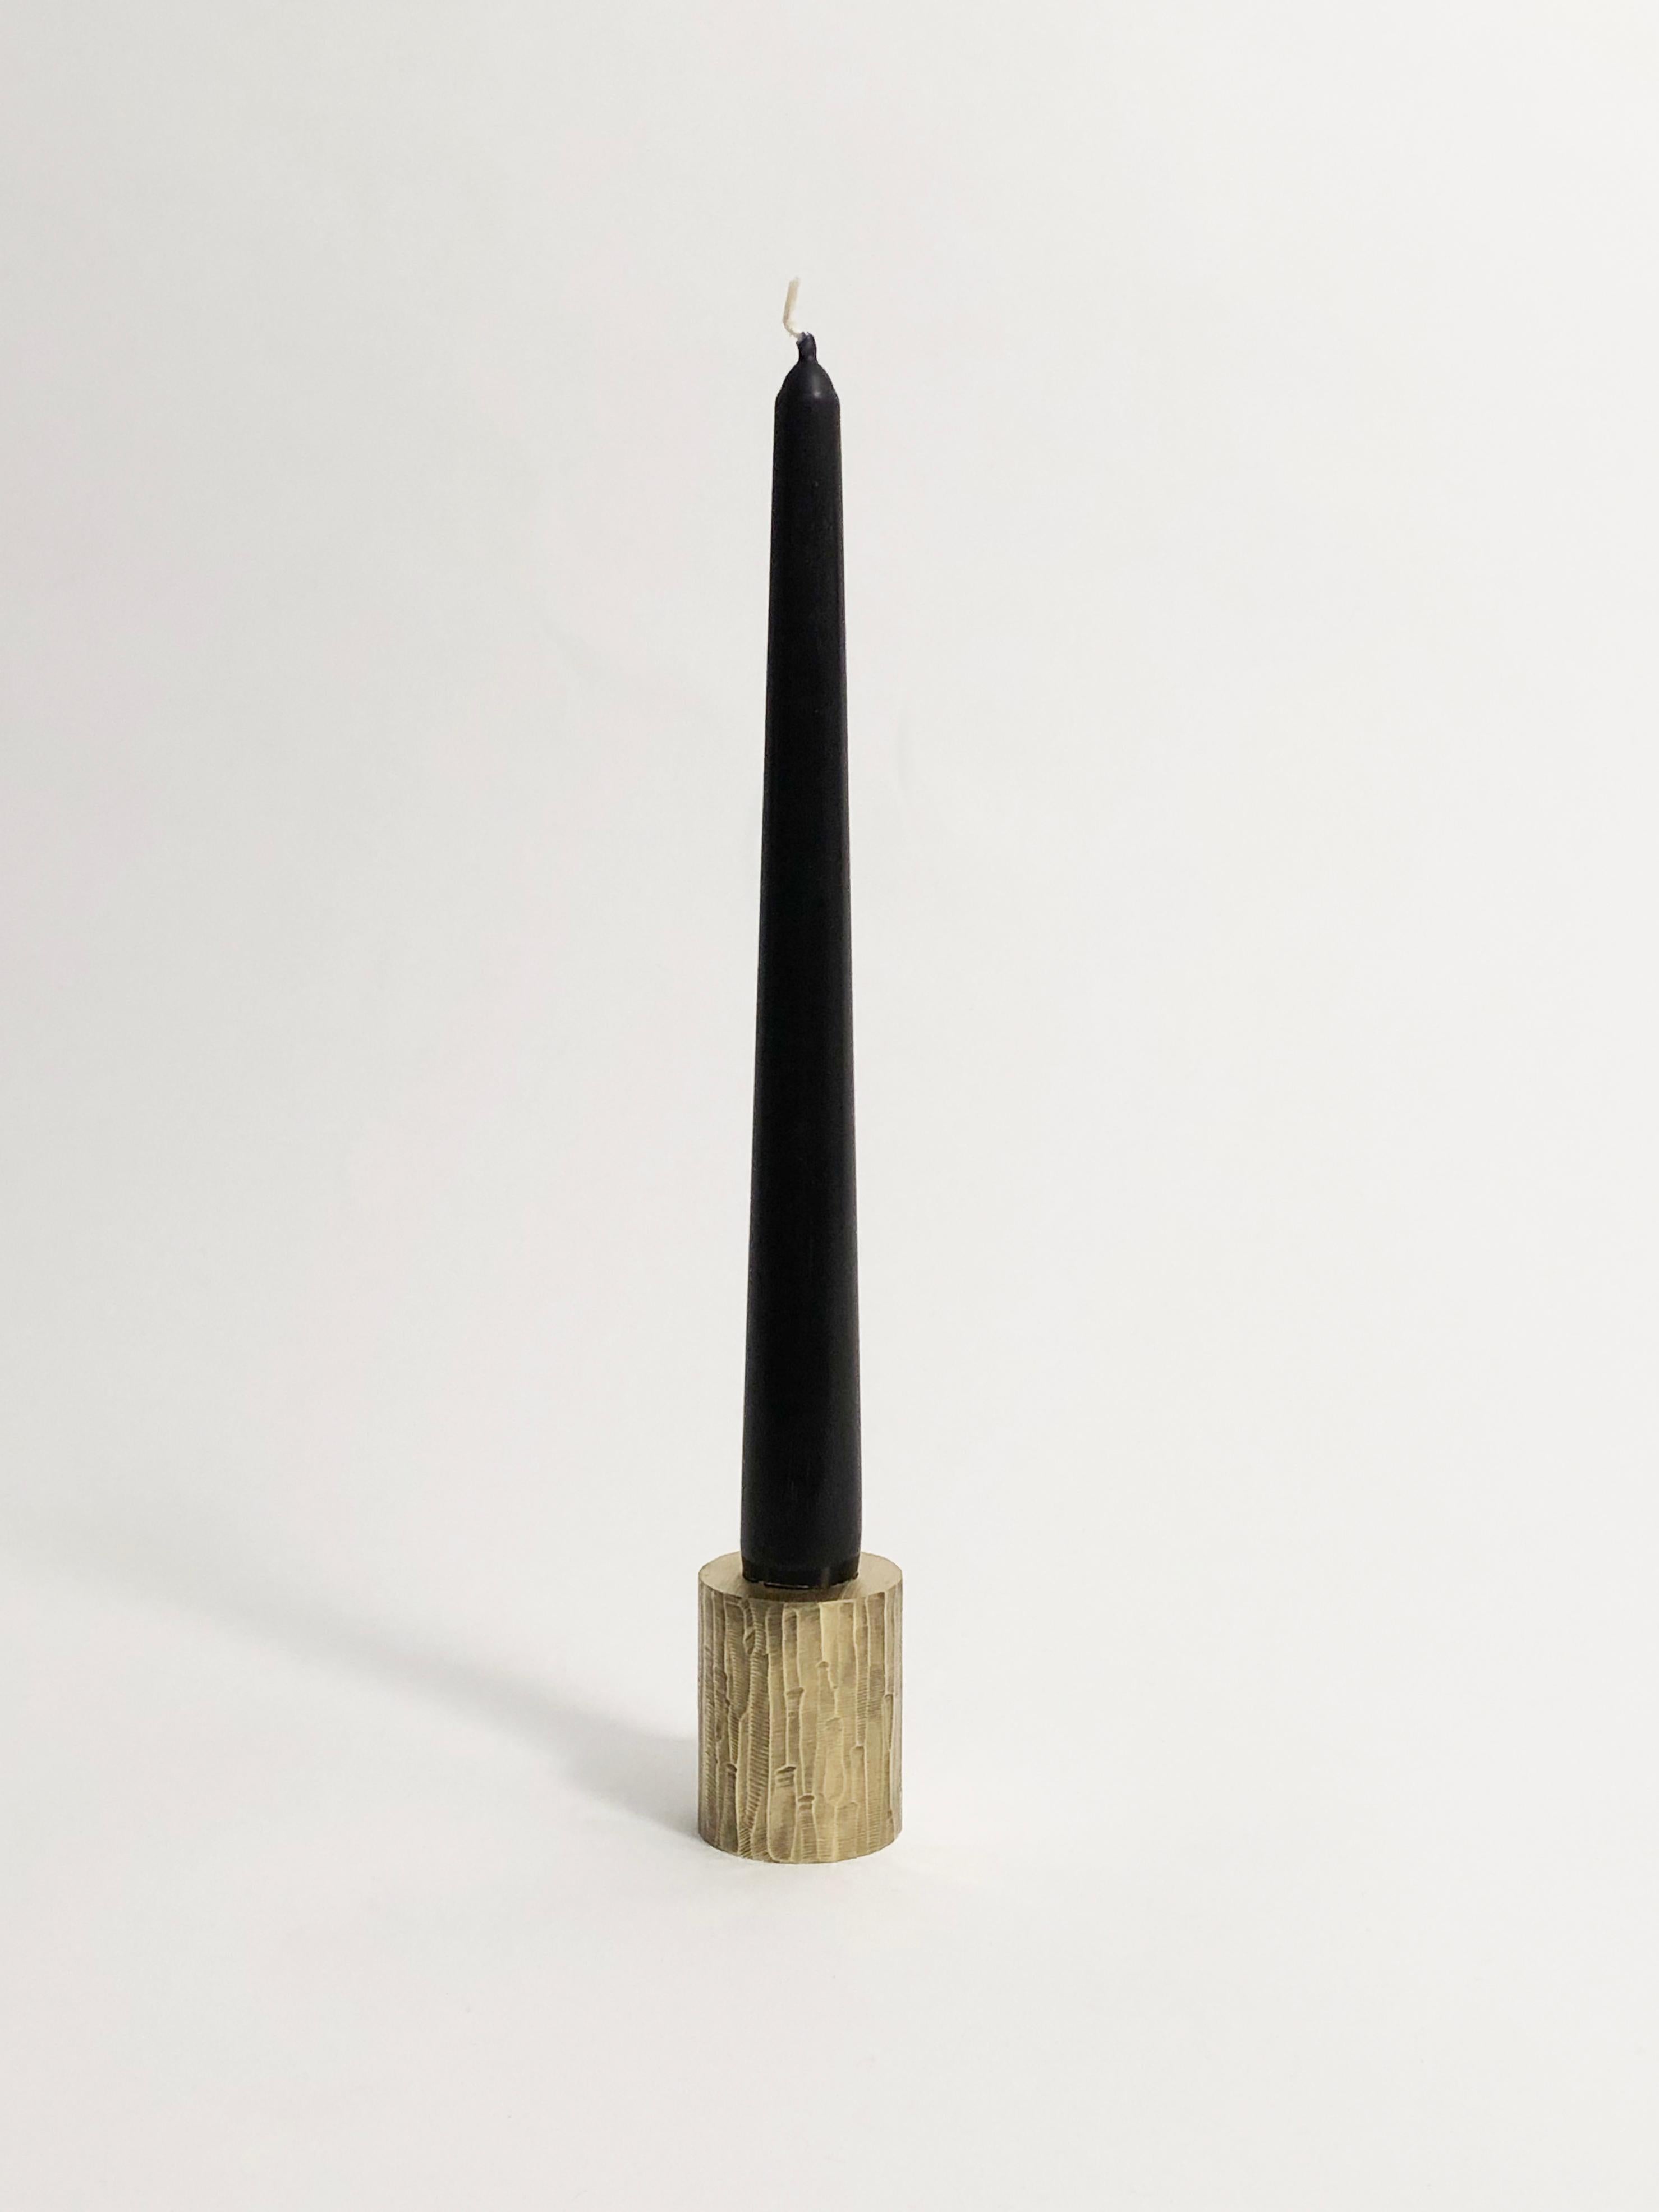 Solid brass sculpted candleholder by William Guillon
Signed William Guillon
Dimensions: Diameter 4 x height 5 cm
Also available: Diameter 3.5 x height 6 cm
Materials: Solid brass, raw finish with polished edge
Patinated black finish